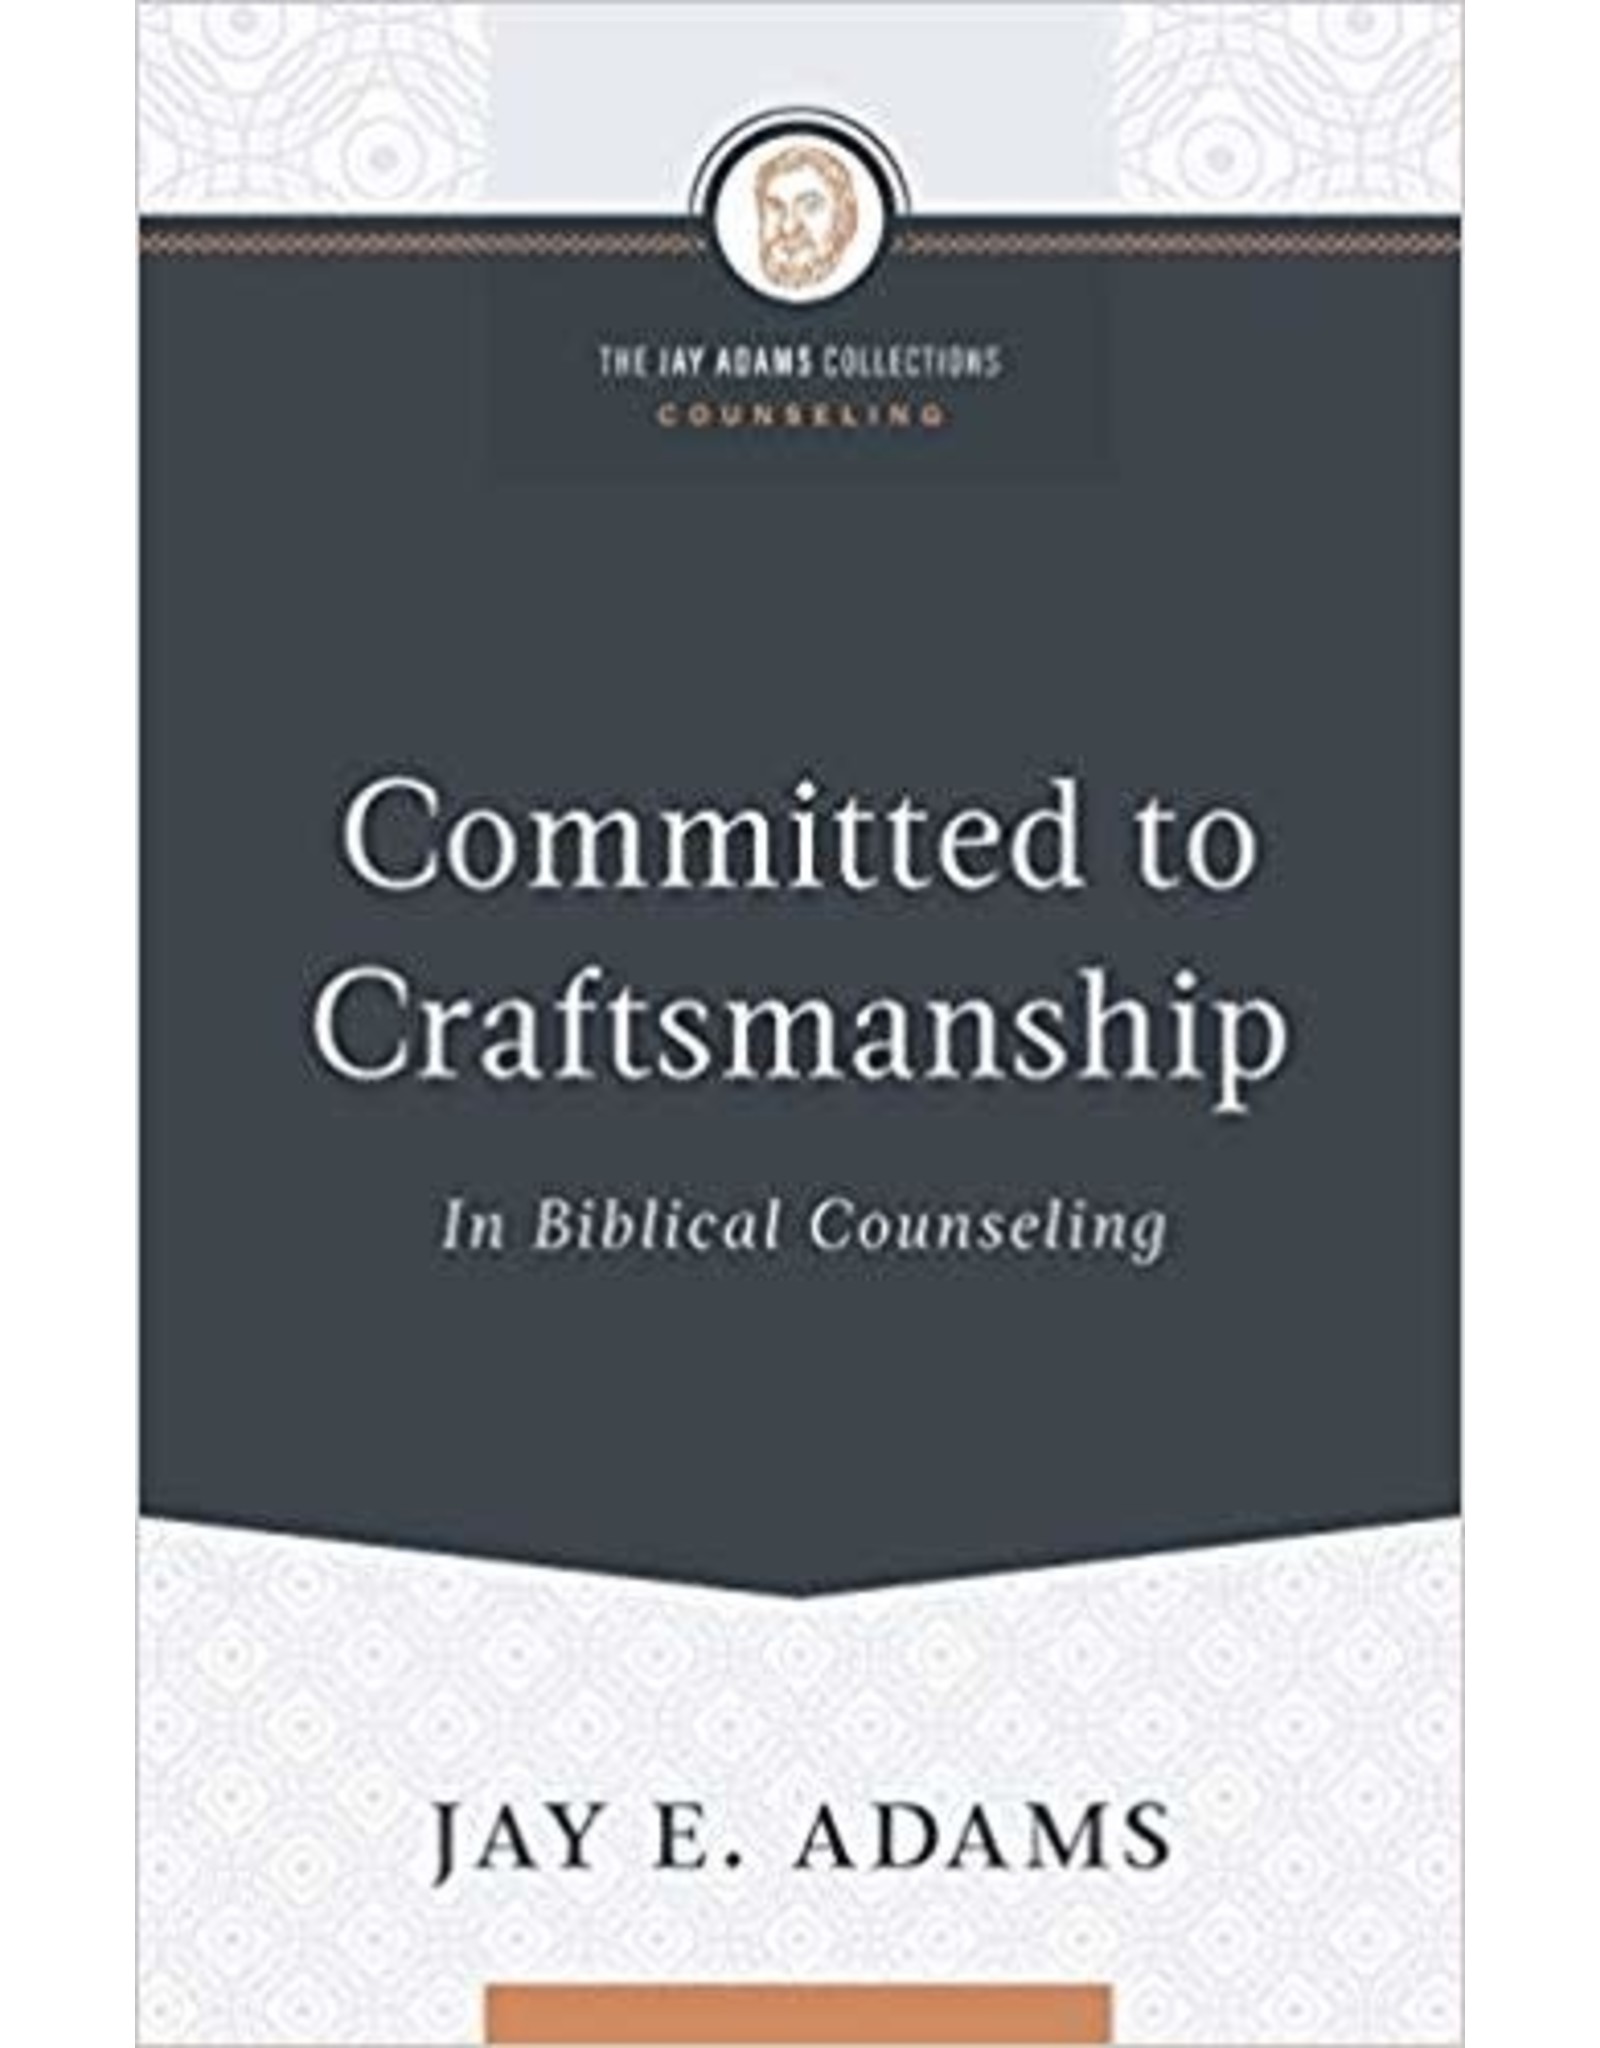 Jay E Adams Committed to Craftsmanship in Biblical Counsel